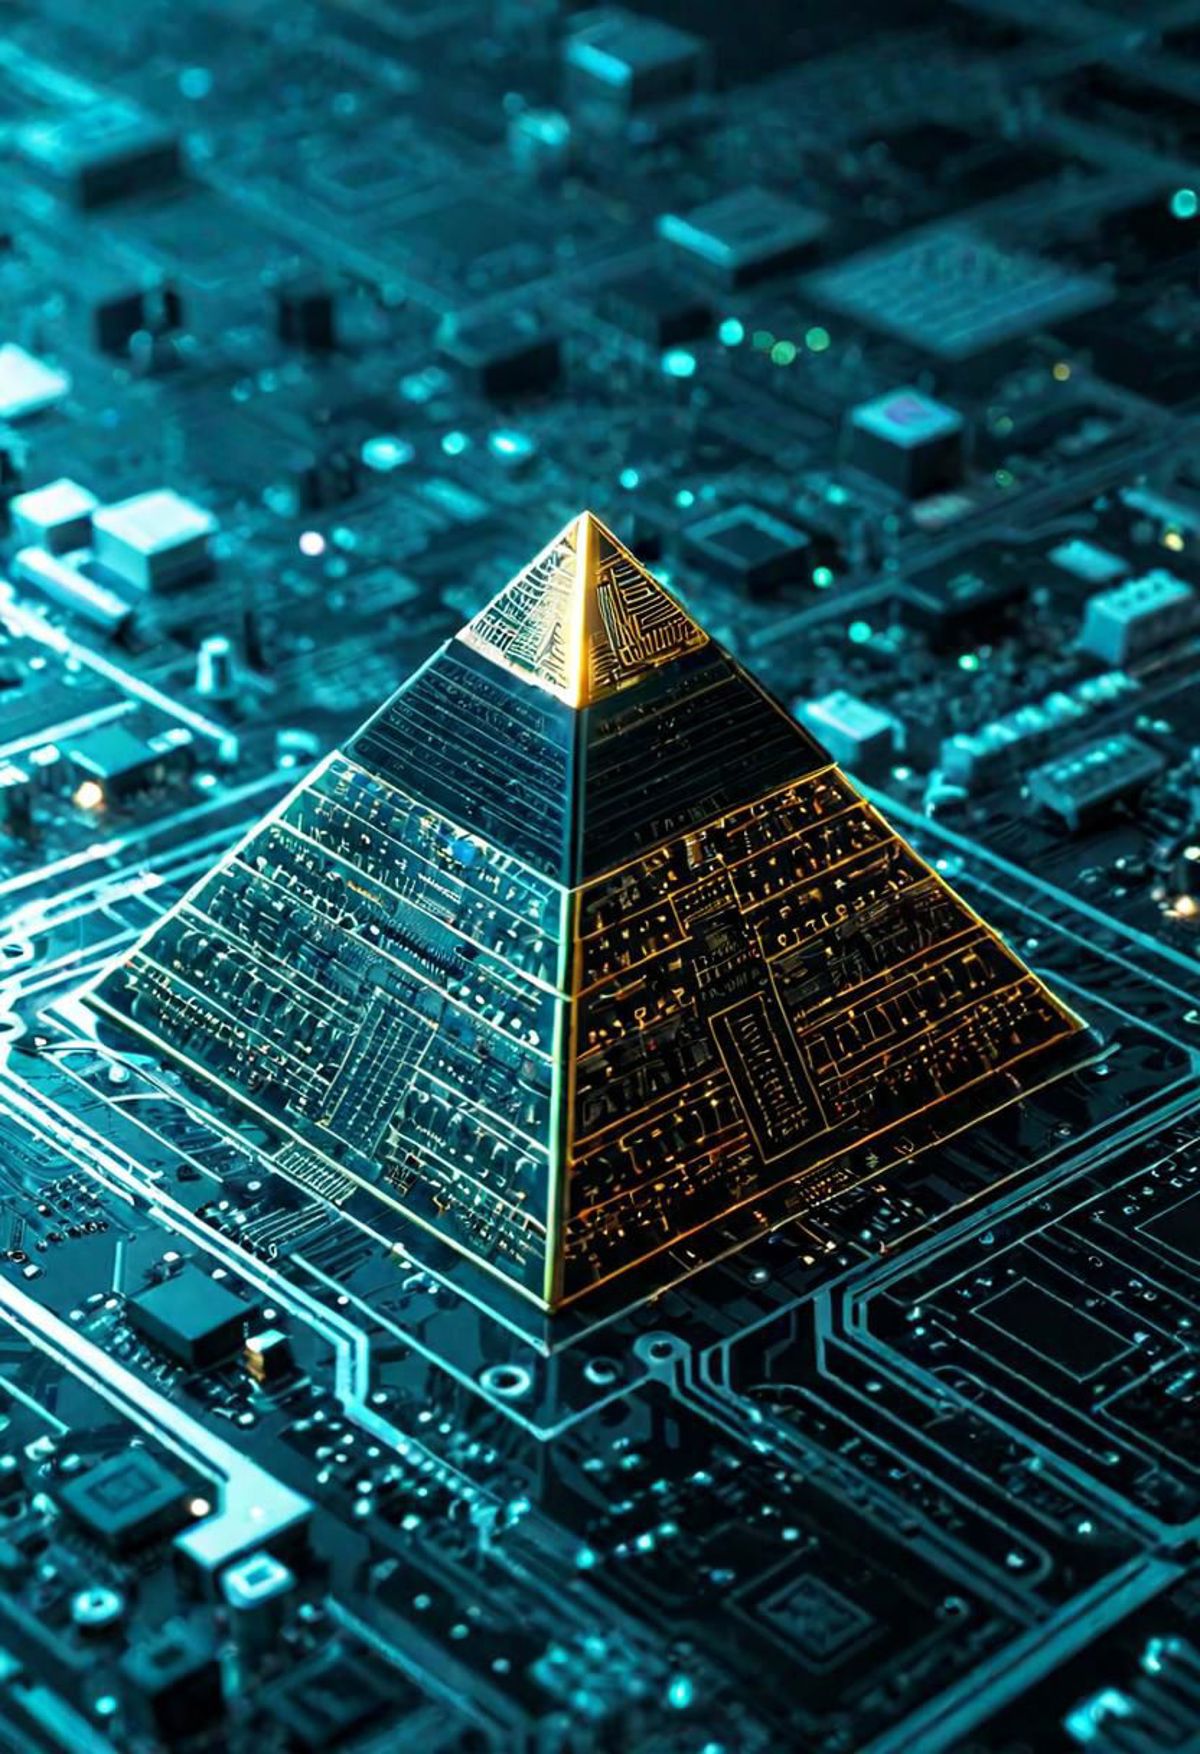 A Pyramid Made of Electronic Circuit Boards and Wires.